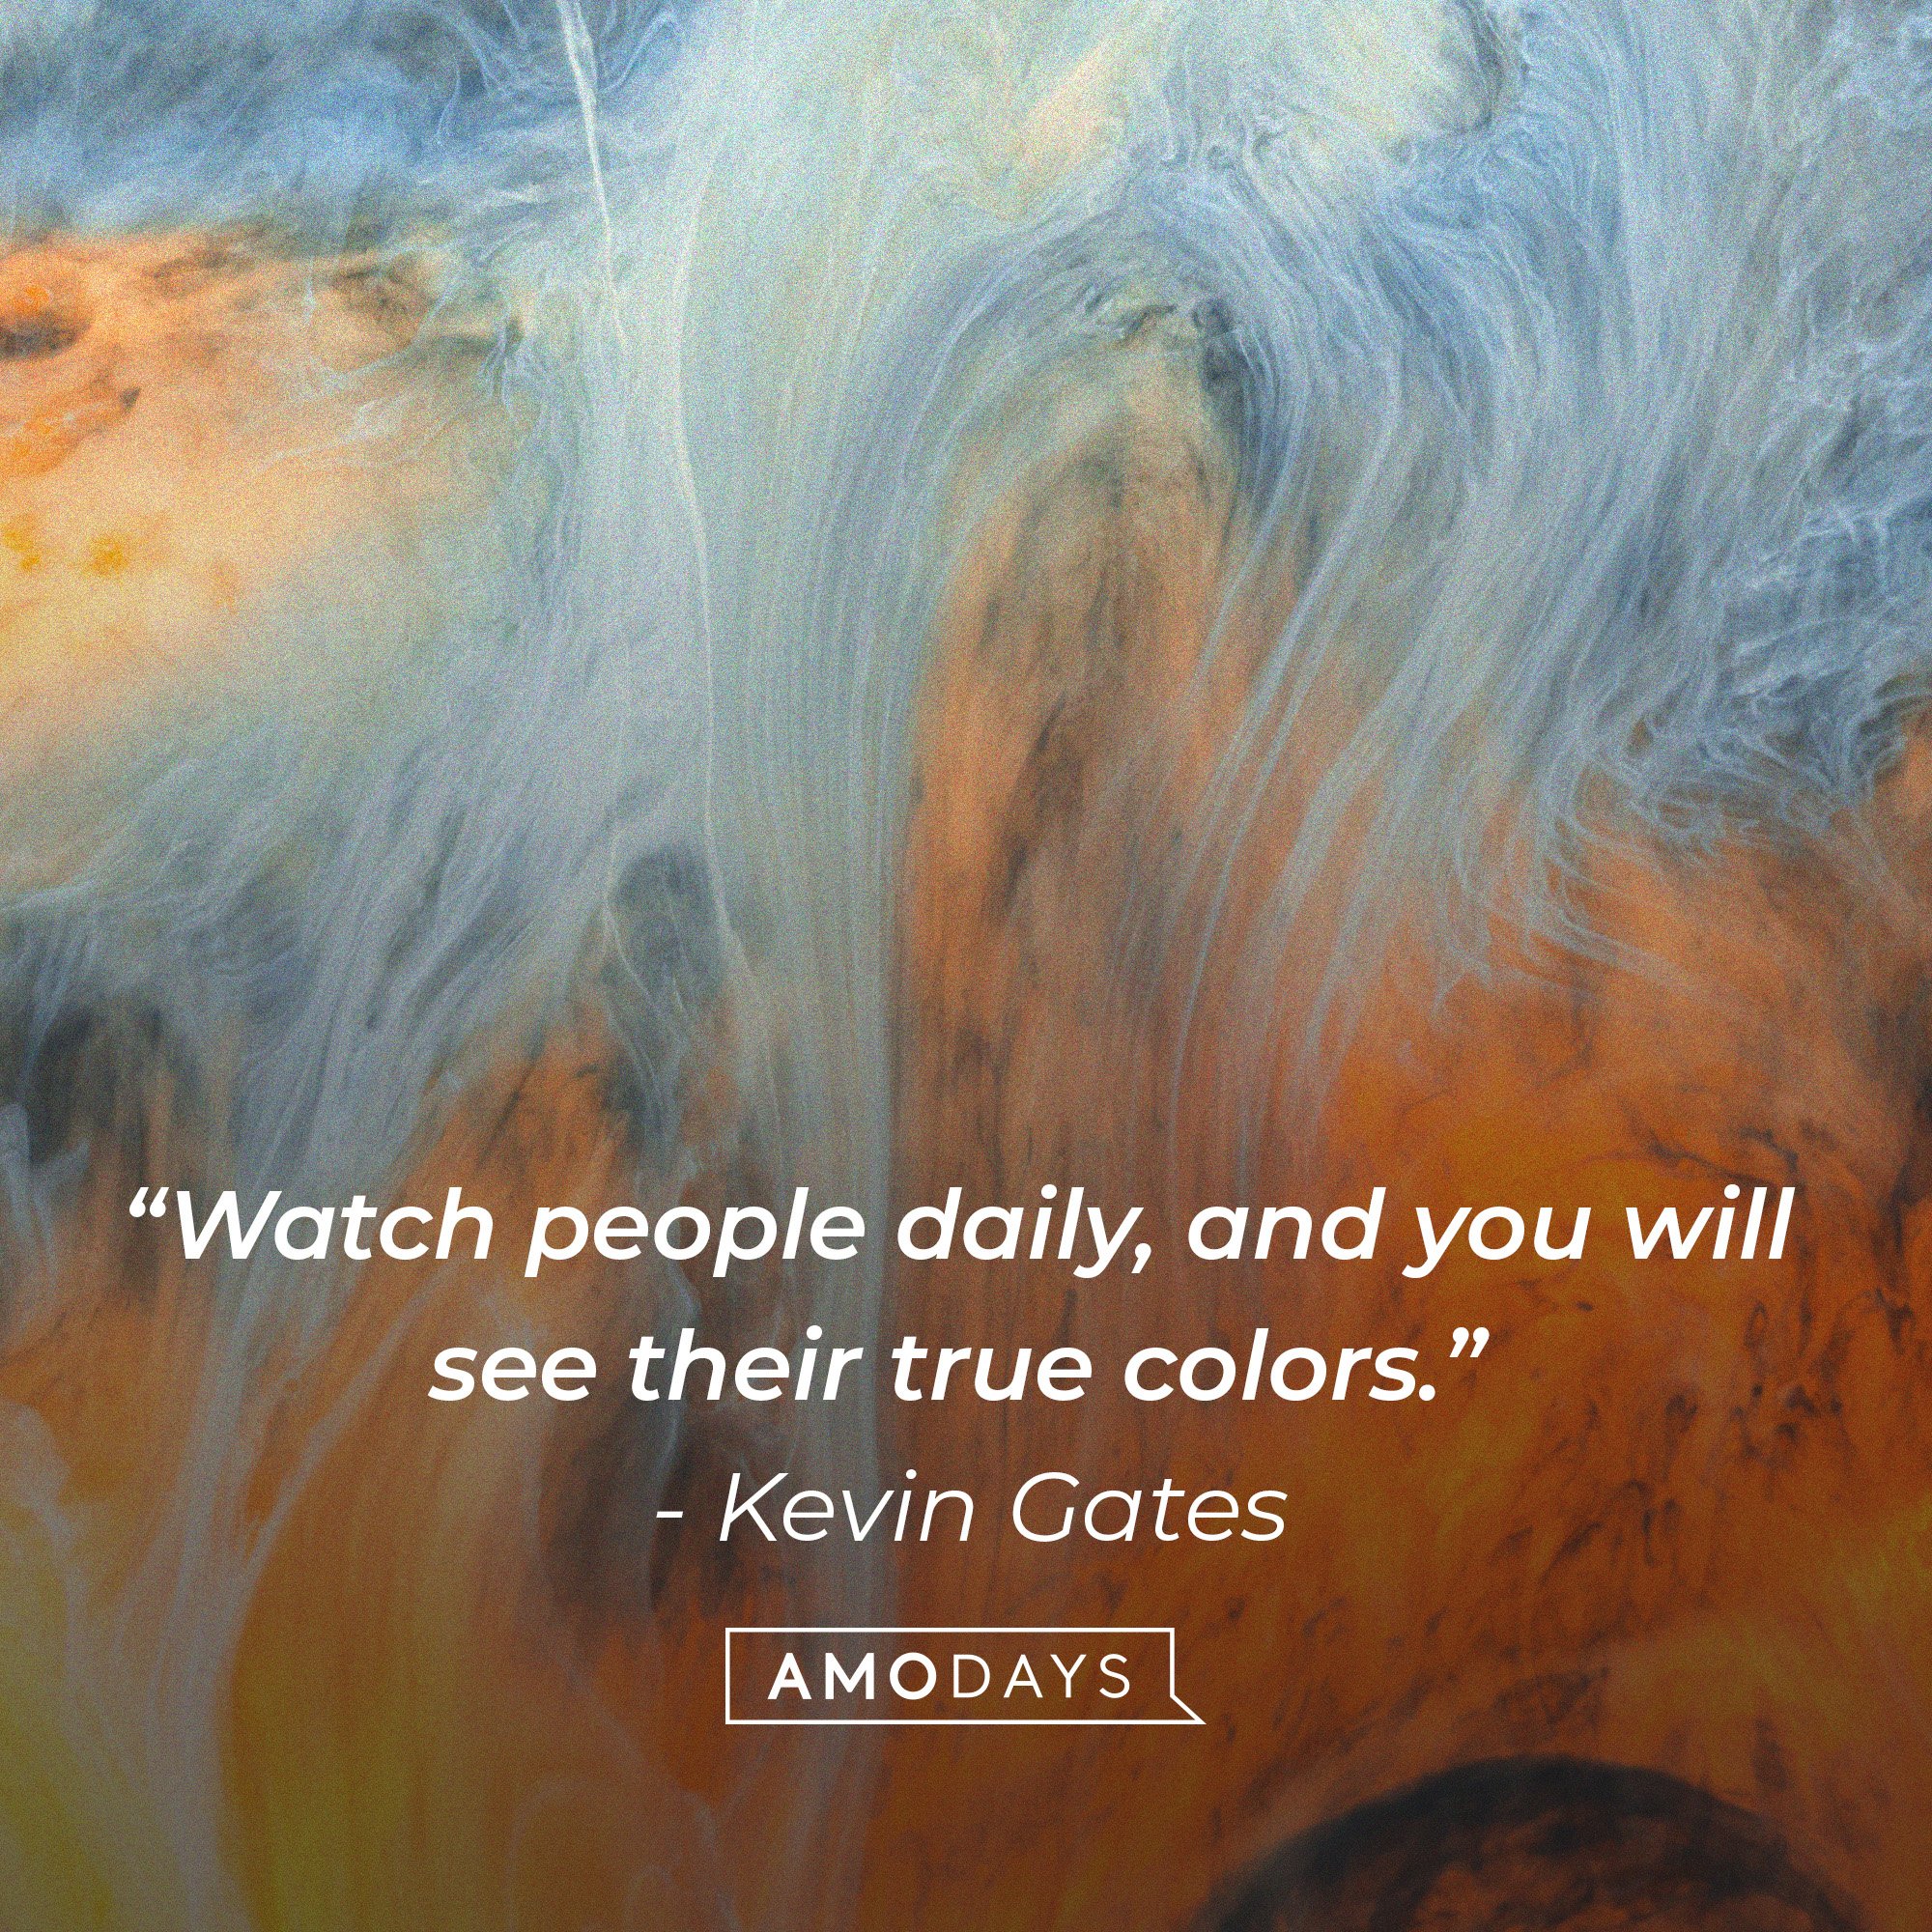  Kevin Gates’ quote: “Watch people daily, and you will see their true colors.”| Image: AmoDays